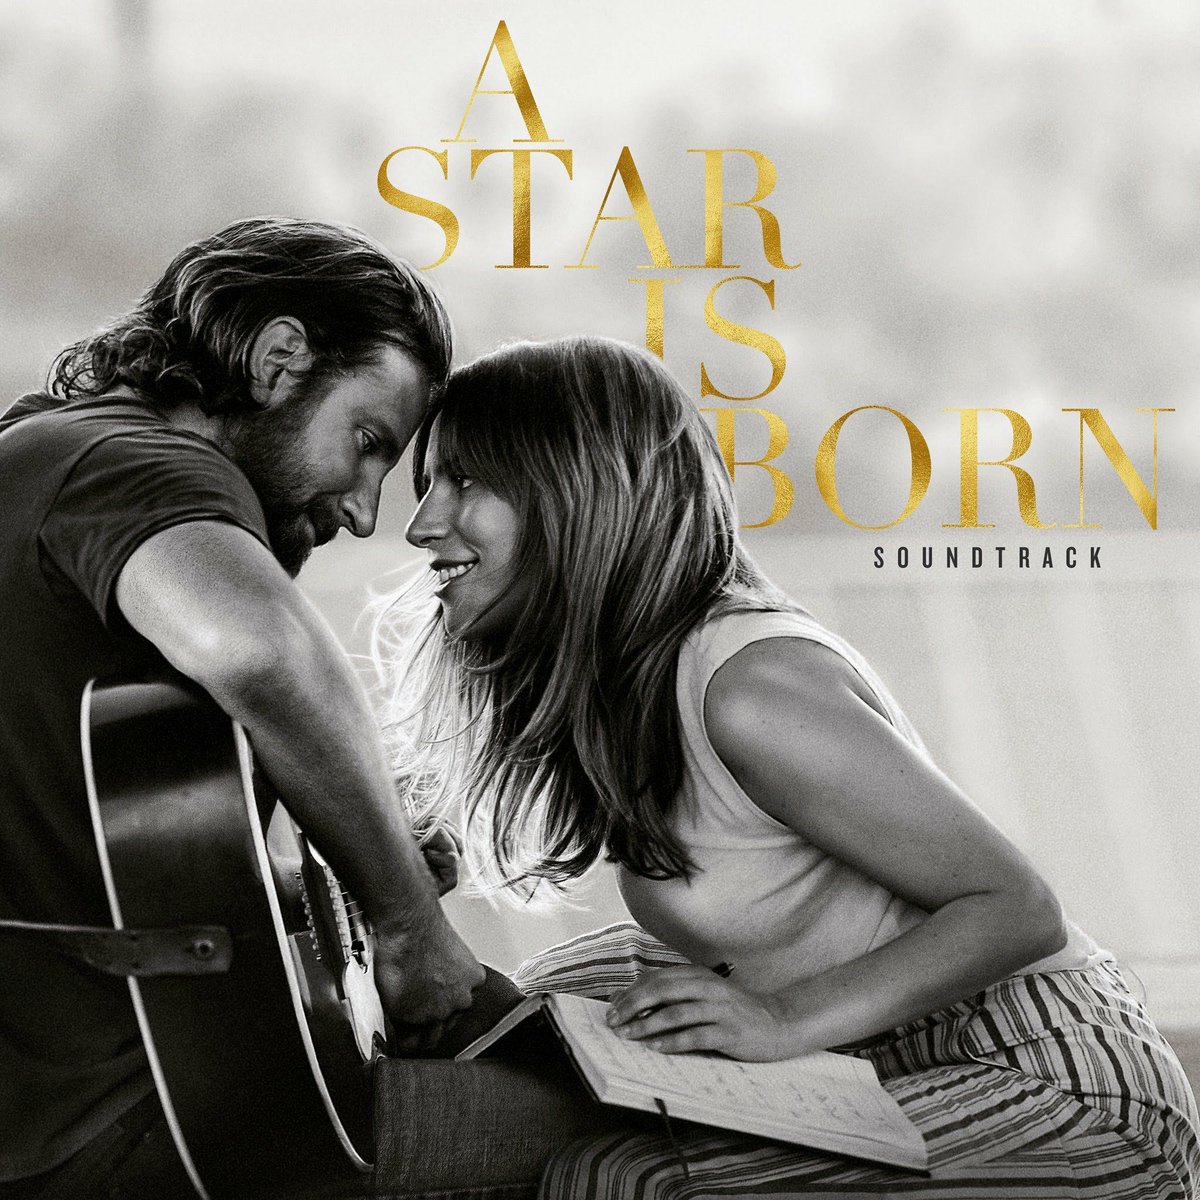 🌎 Worldwide iTunes Chart:

Songs:
#44 (+15) Always Remember Us This Way
#154 (+30) Shallow

Albums:
#54 (+8) A Star Is Born Soundtrack

🇪🇺 European iTunes Chart:

Songs:
#37 (+34) Always Remember Us This Way
#71 (+6) Shallow

Albums:
#38 (+2) A Star Is Born Soundtrack